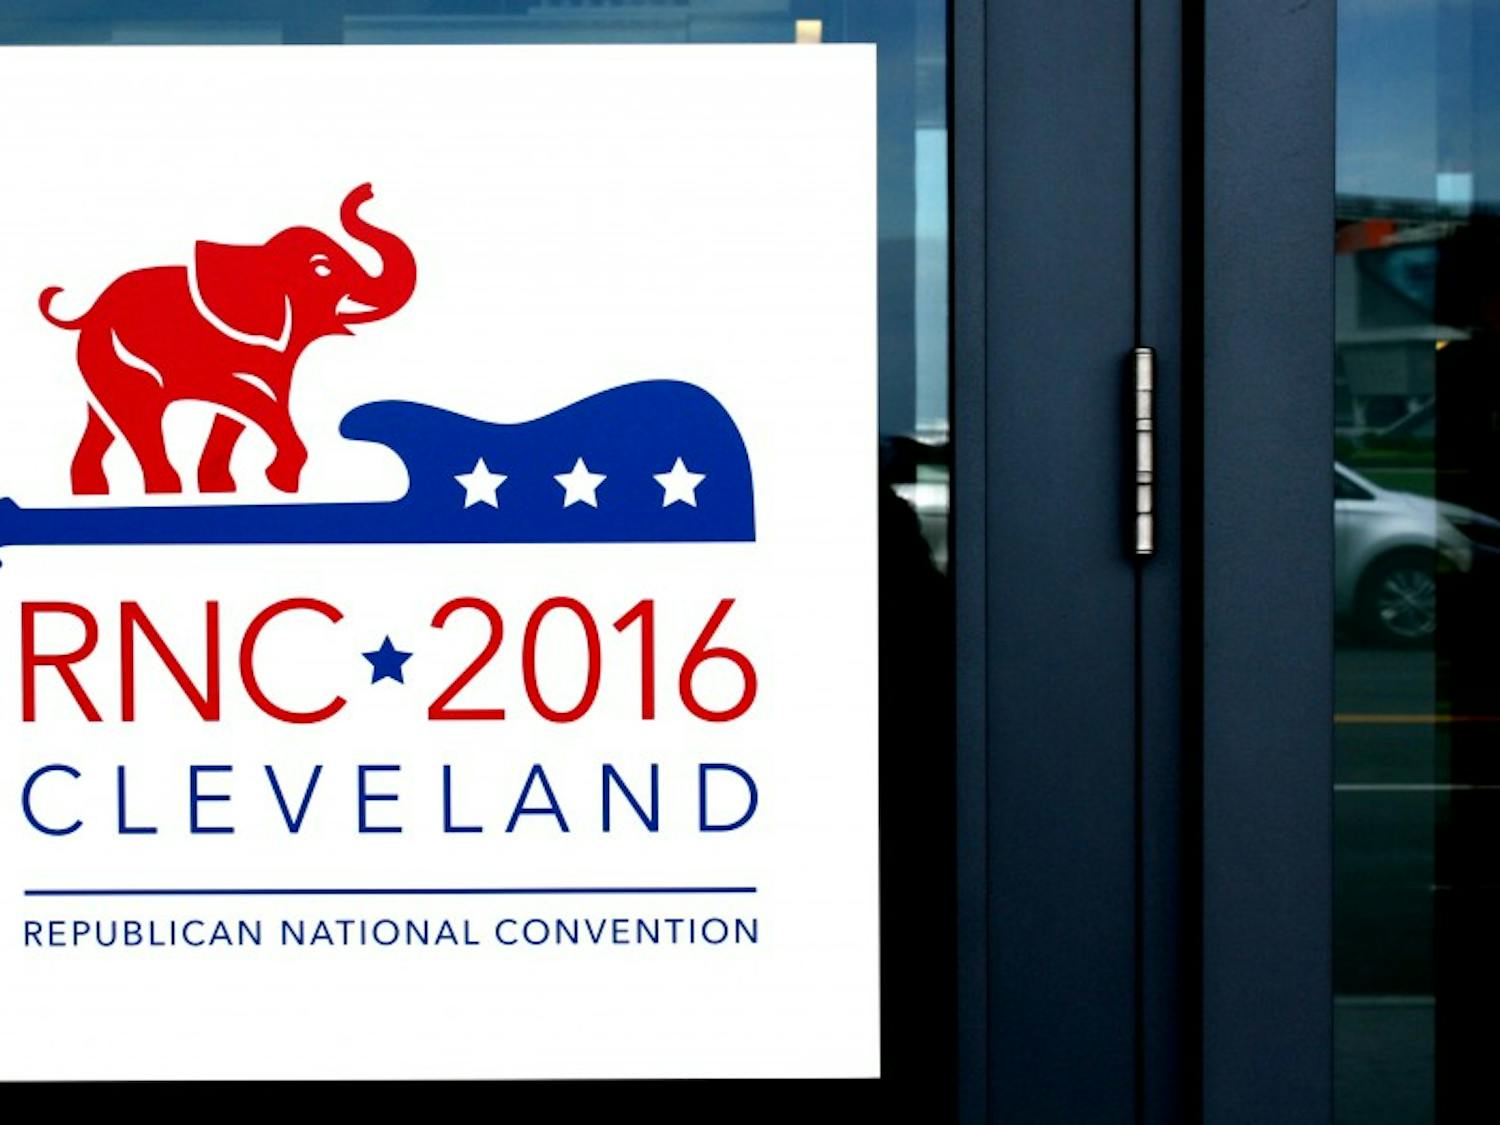 The Republican National Convention will last from Monday to Thursday, ending with the Donald Trump officially being nominated by the GOP.